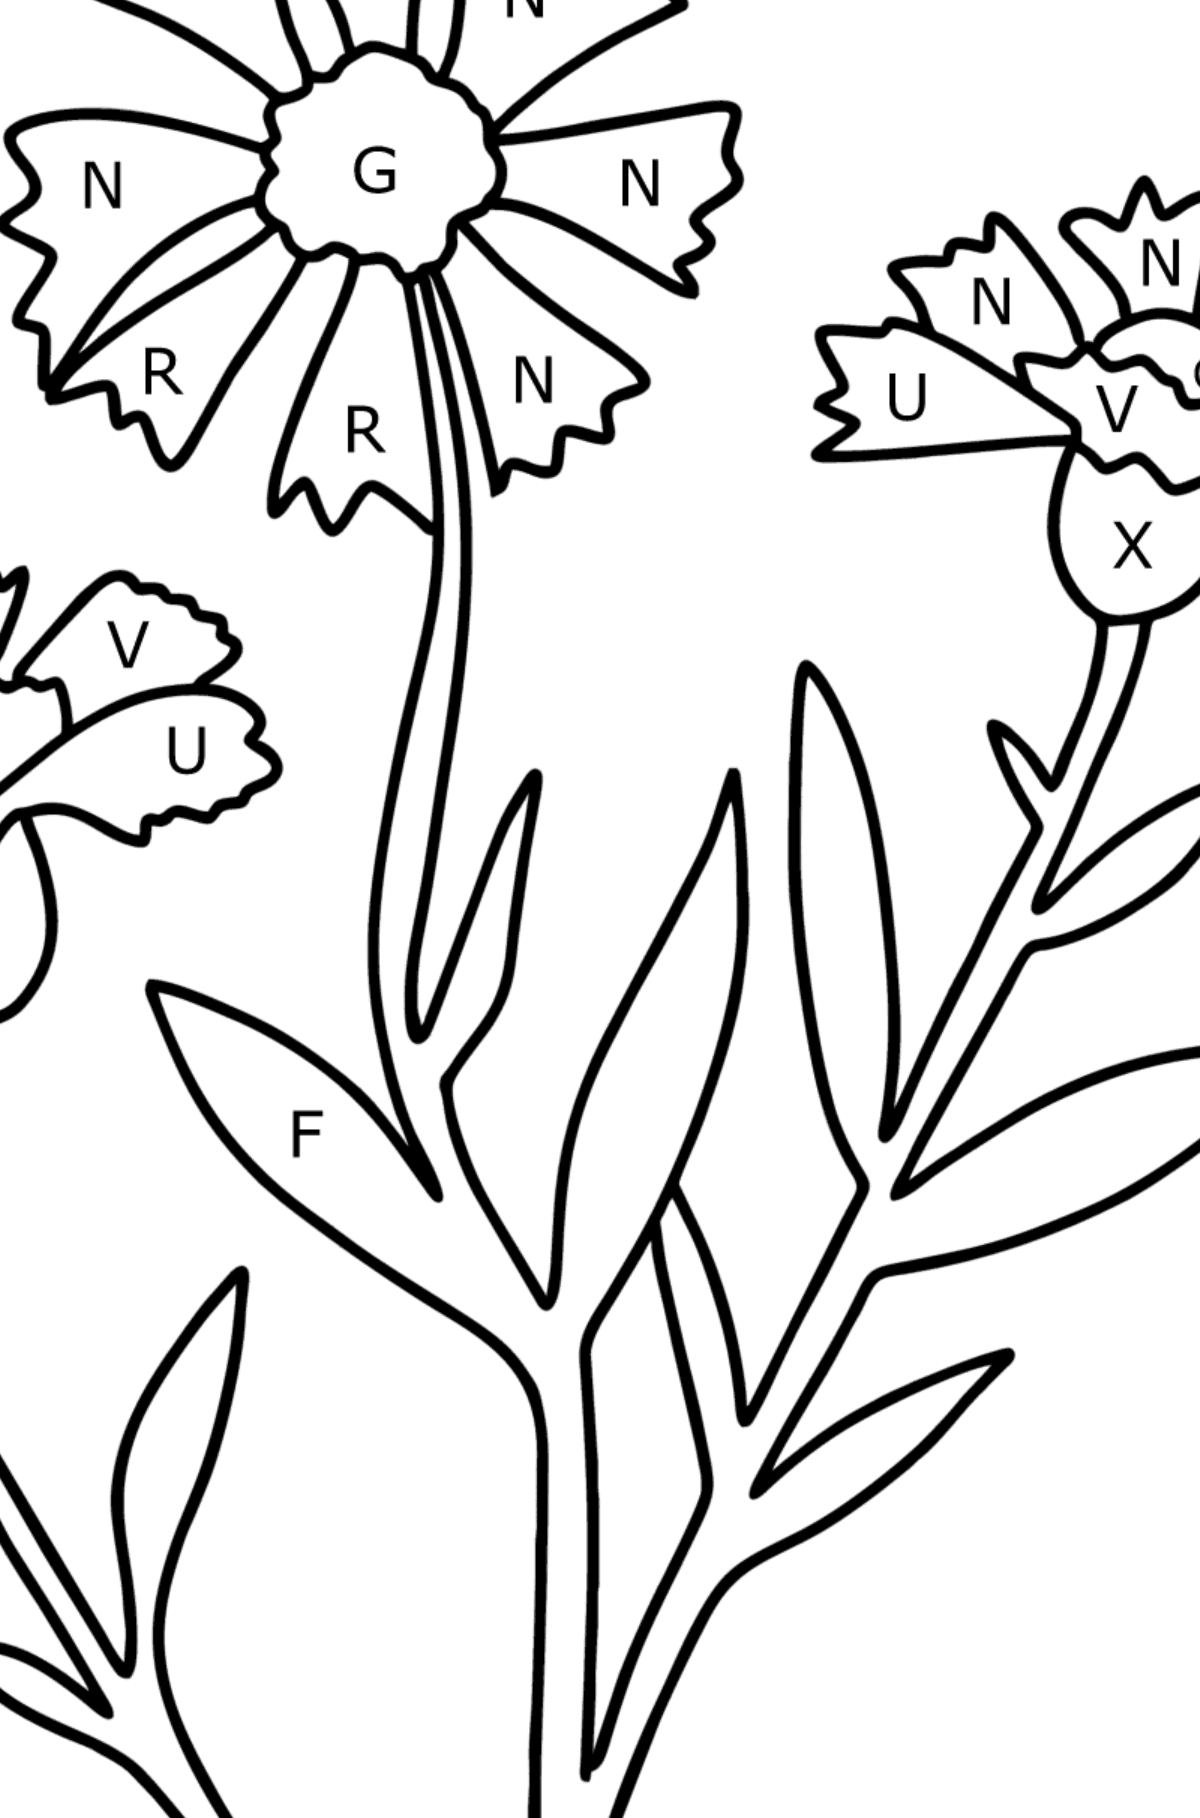 Knapweed coloring page - Coloring by Letters for Kids